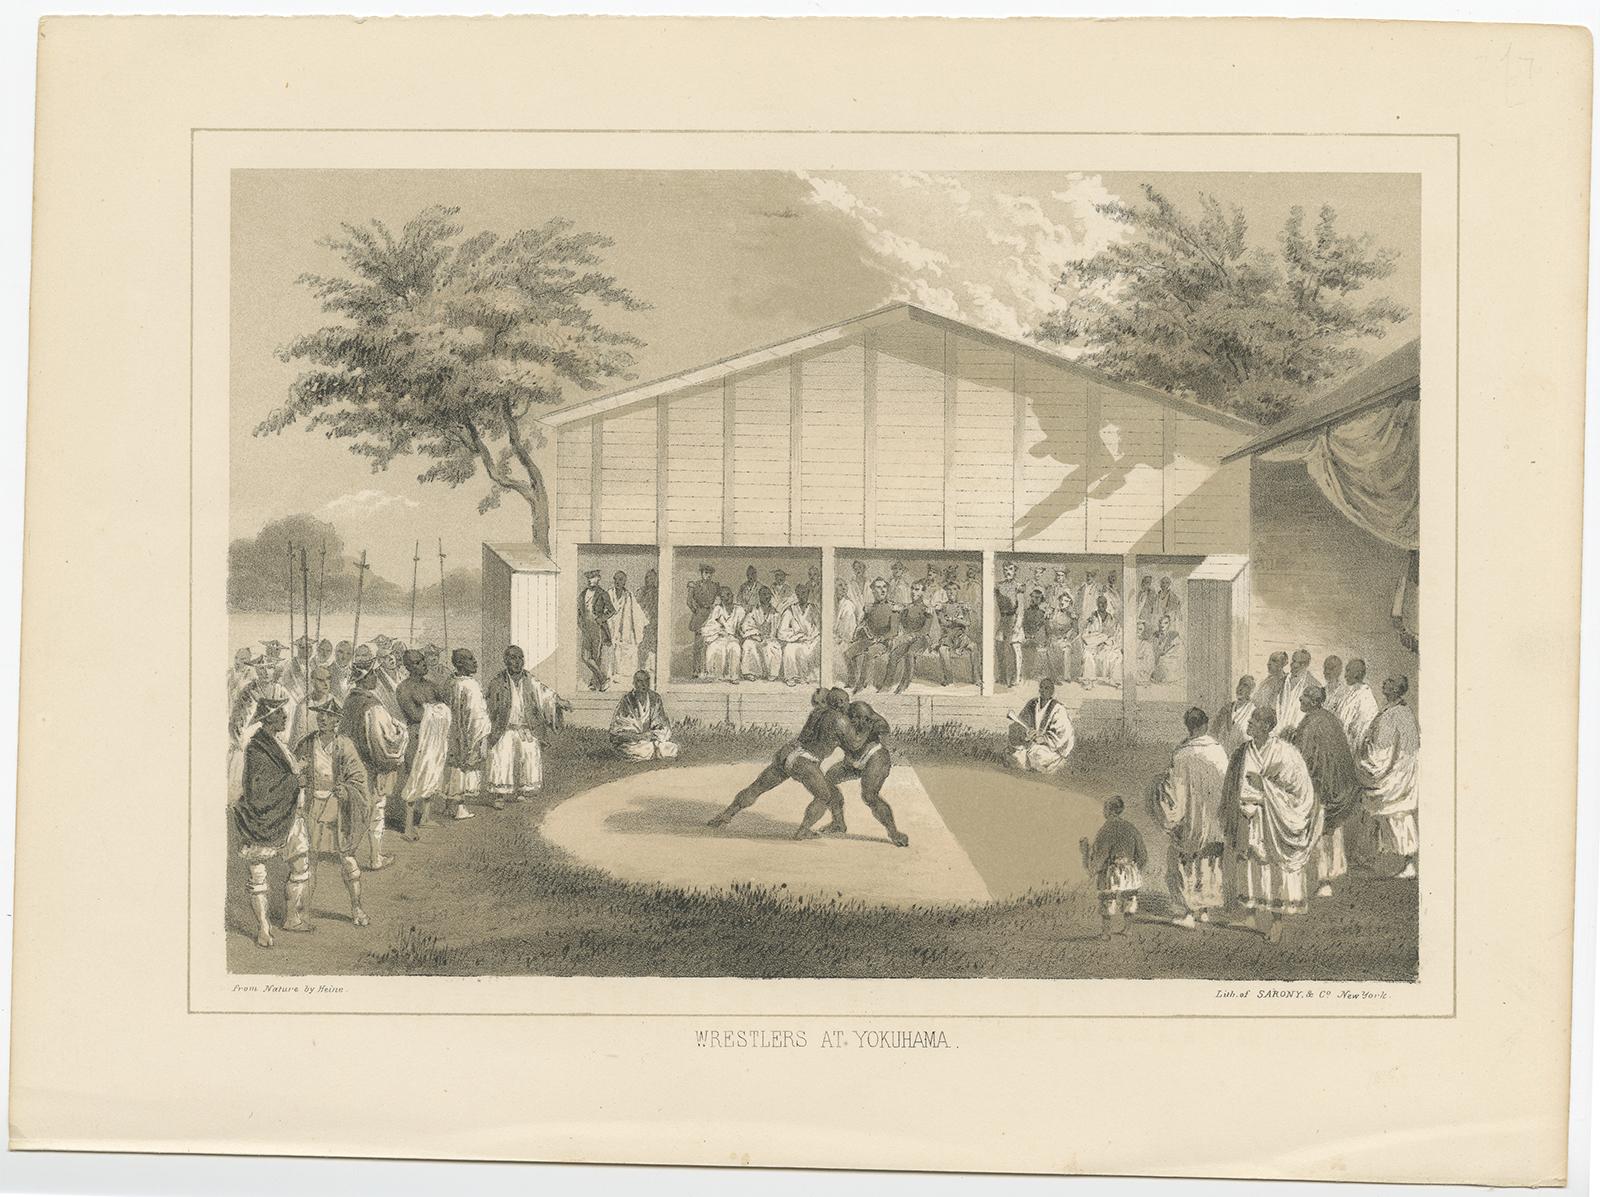 This historical lithograph, titled 'Wrestlers at Yokohama,' is drawn from the comprehensive accounts of the American expedition to the China Seas and Japan, led by Commodore M.C. Perry, as chronicled in the official narrative of the journey. The